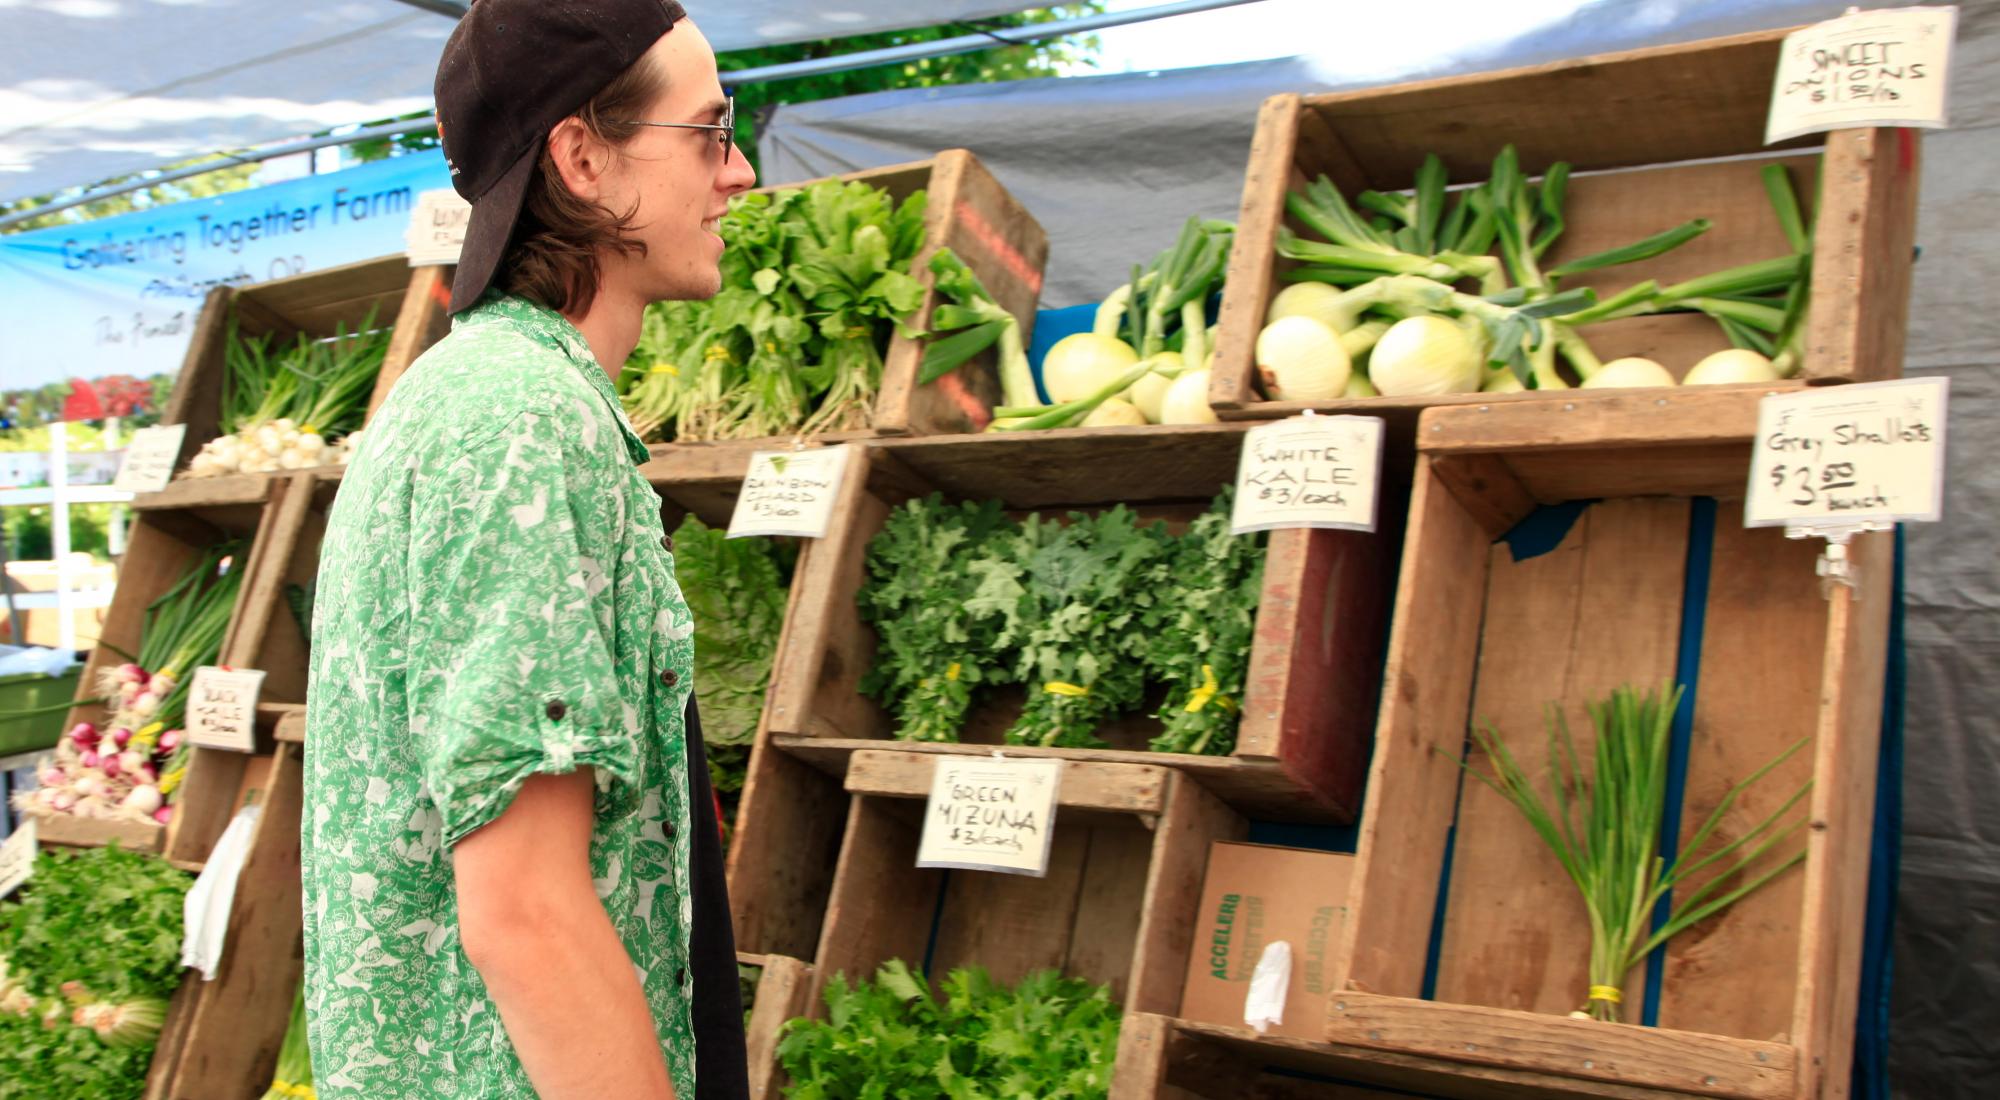 A young man considering produce at the farmer's market